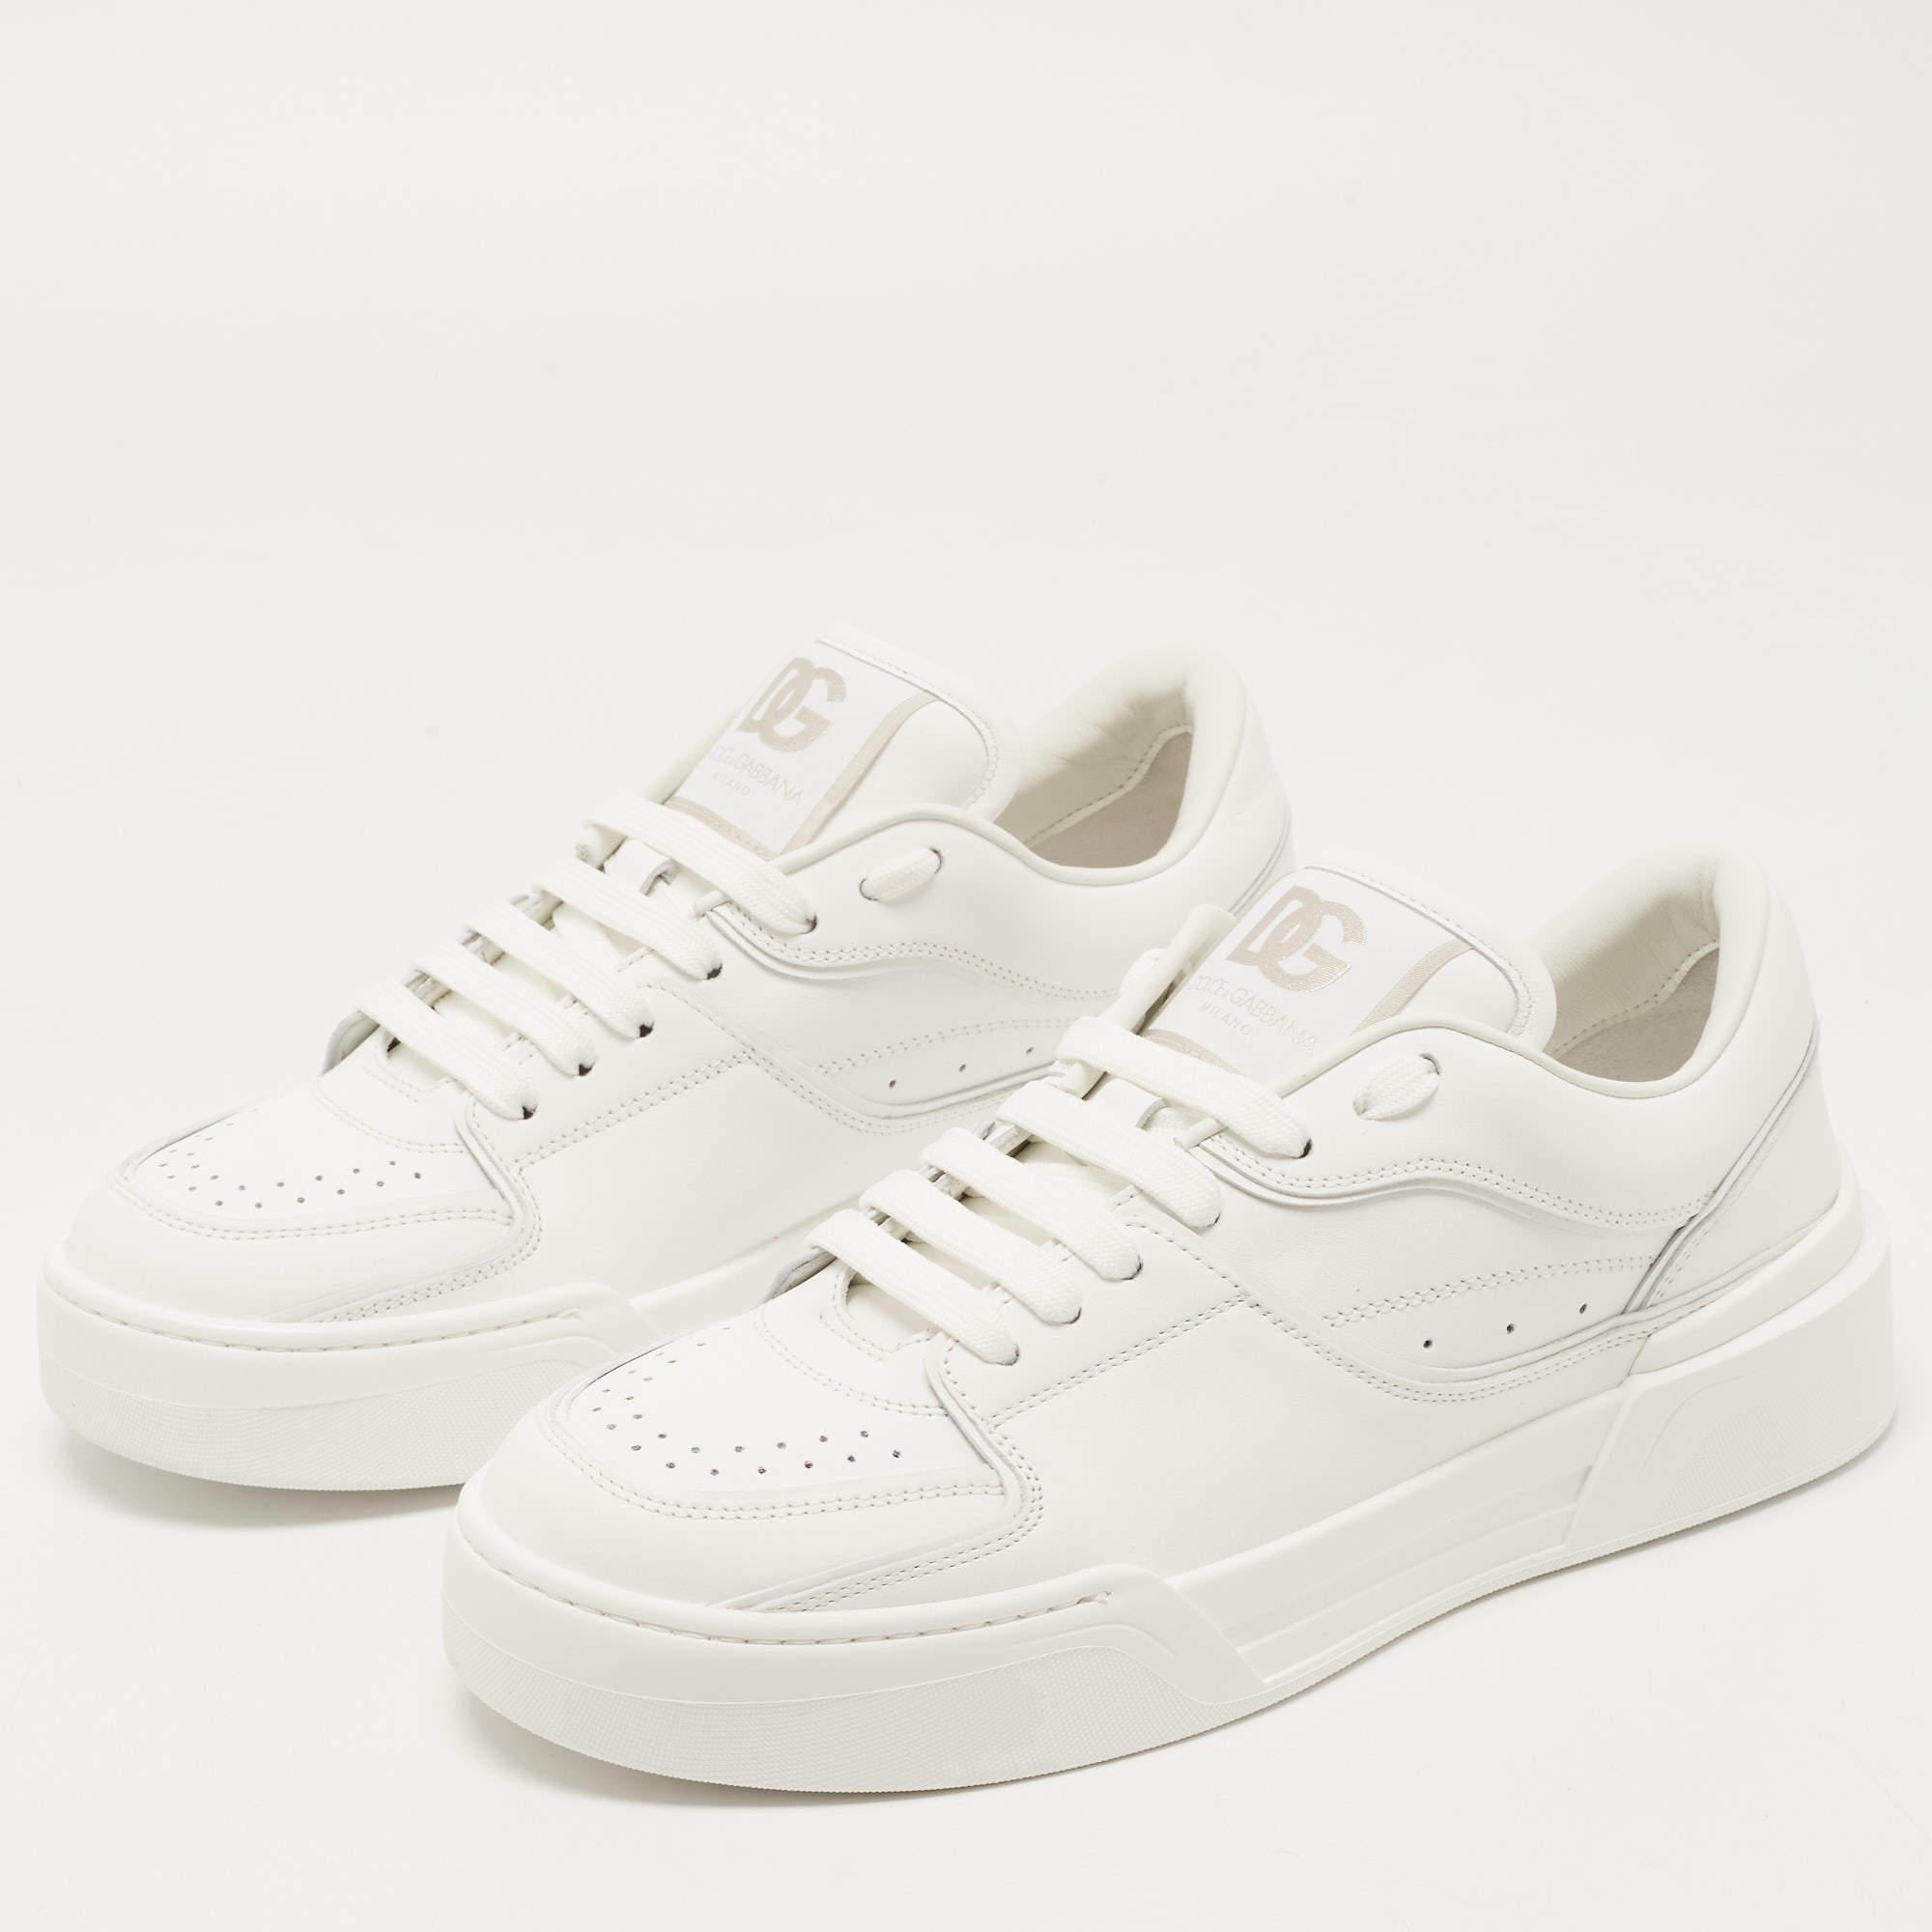 Dolce & Gabbana White Leather Roma Sneakers Size 41 1